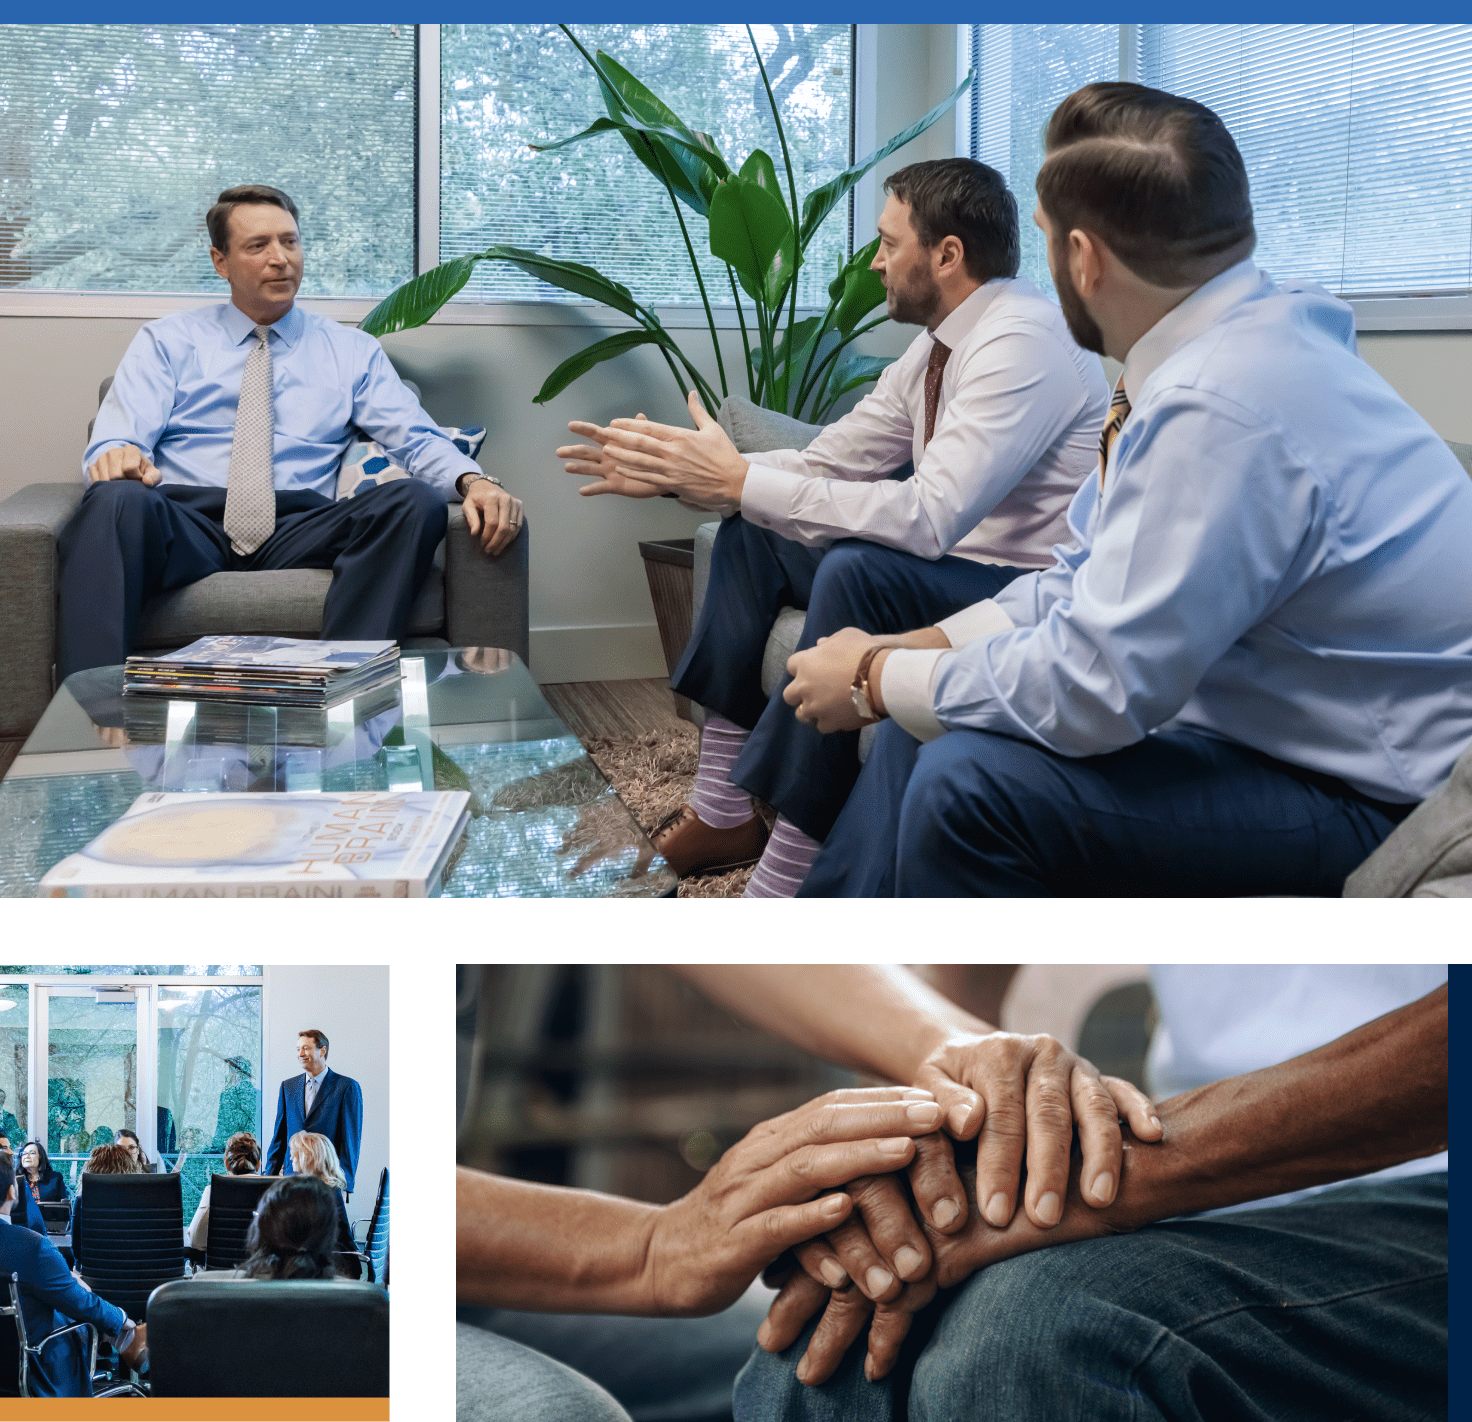 Collage: relaxed office conversation, engaging presentation, hands together in unity.